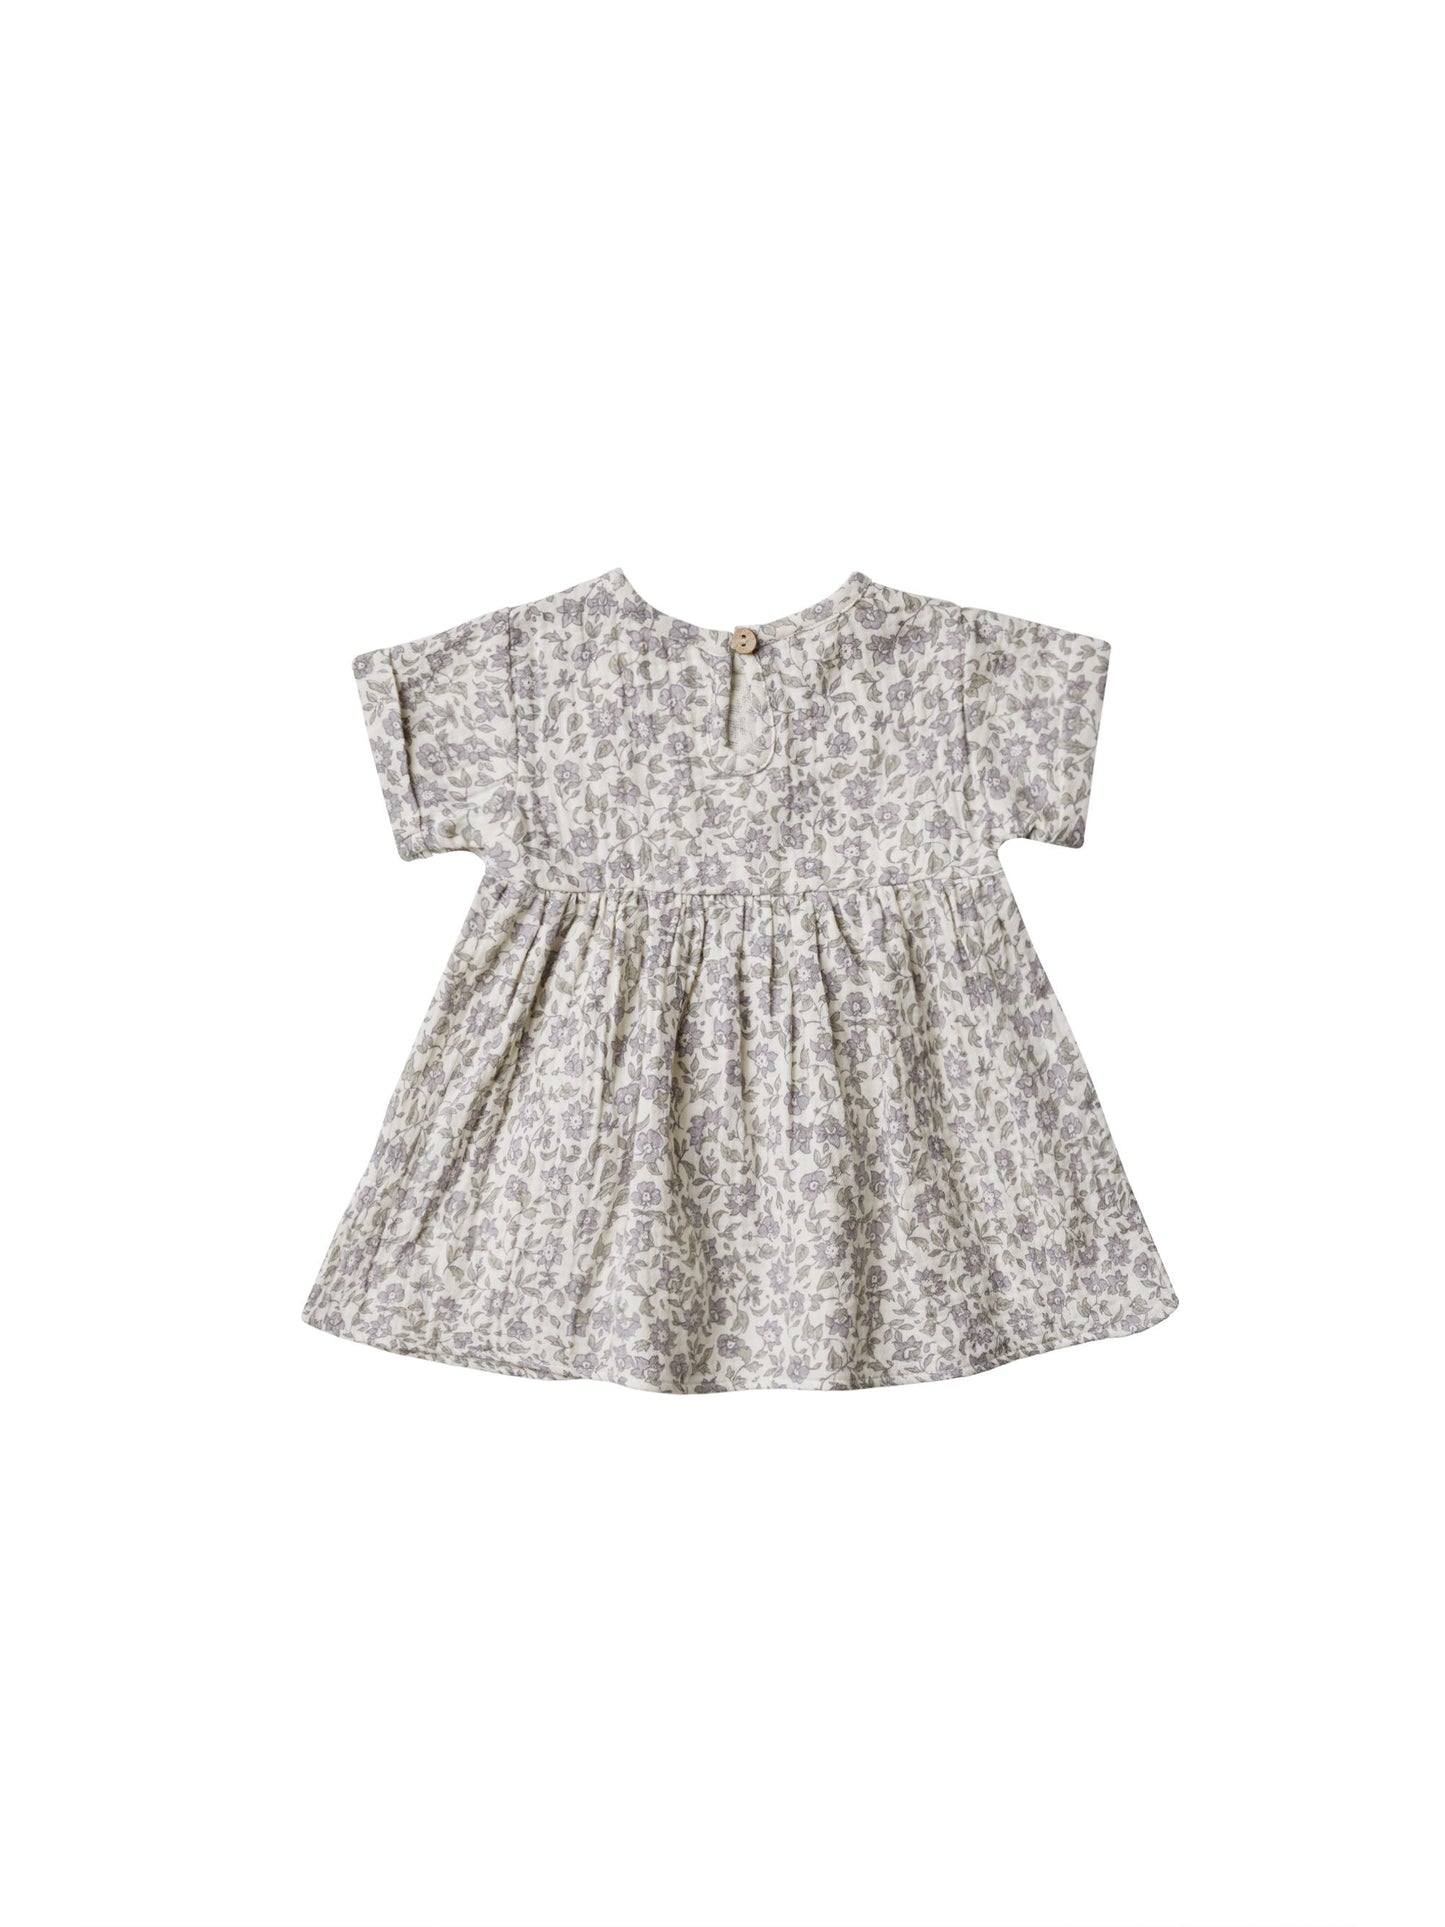 Quincy Mae Brielle Dress in French Garden